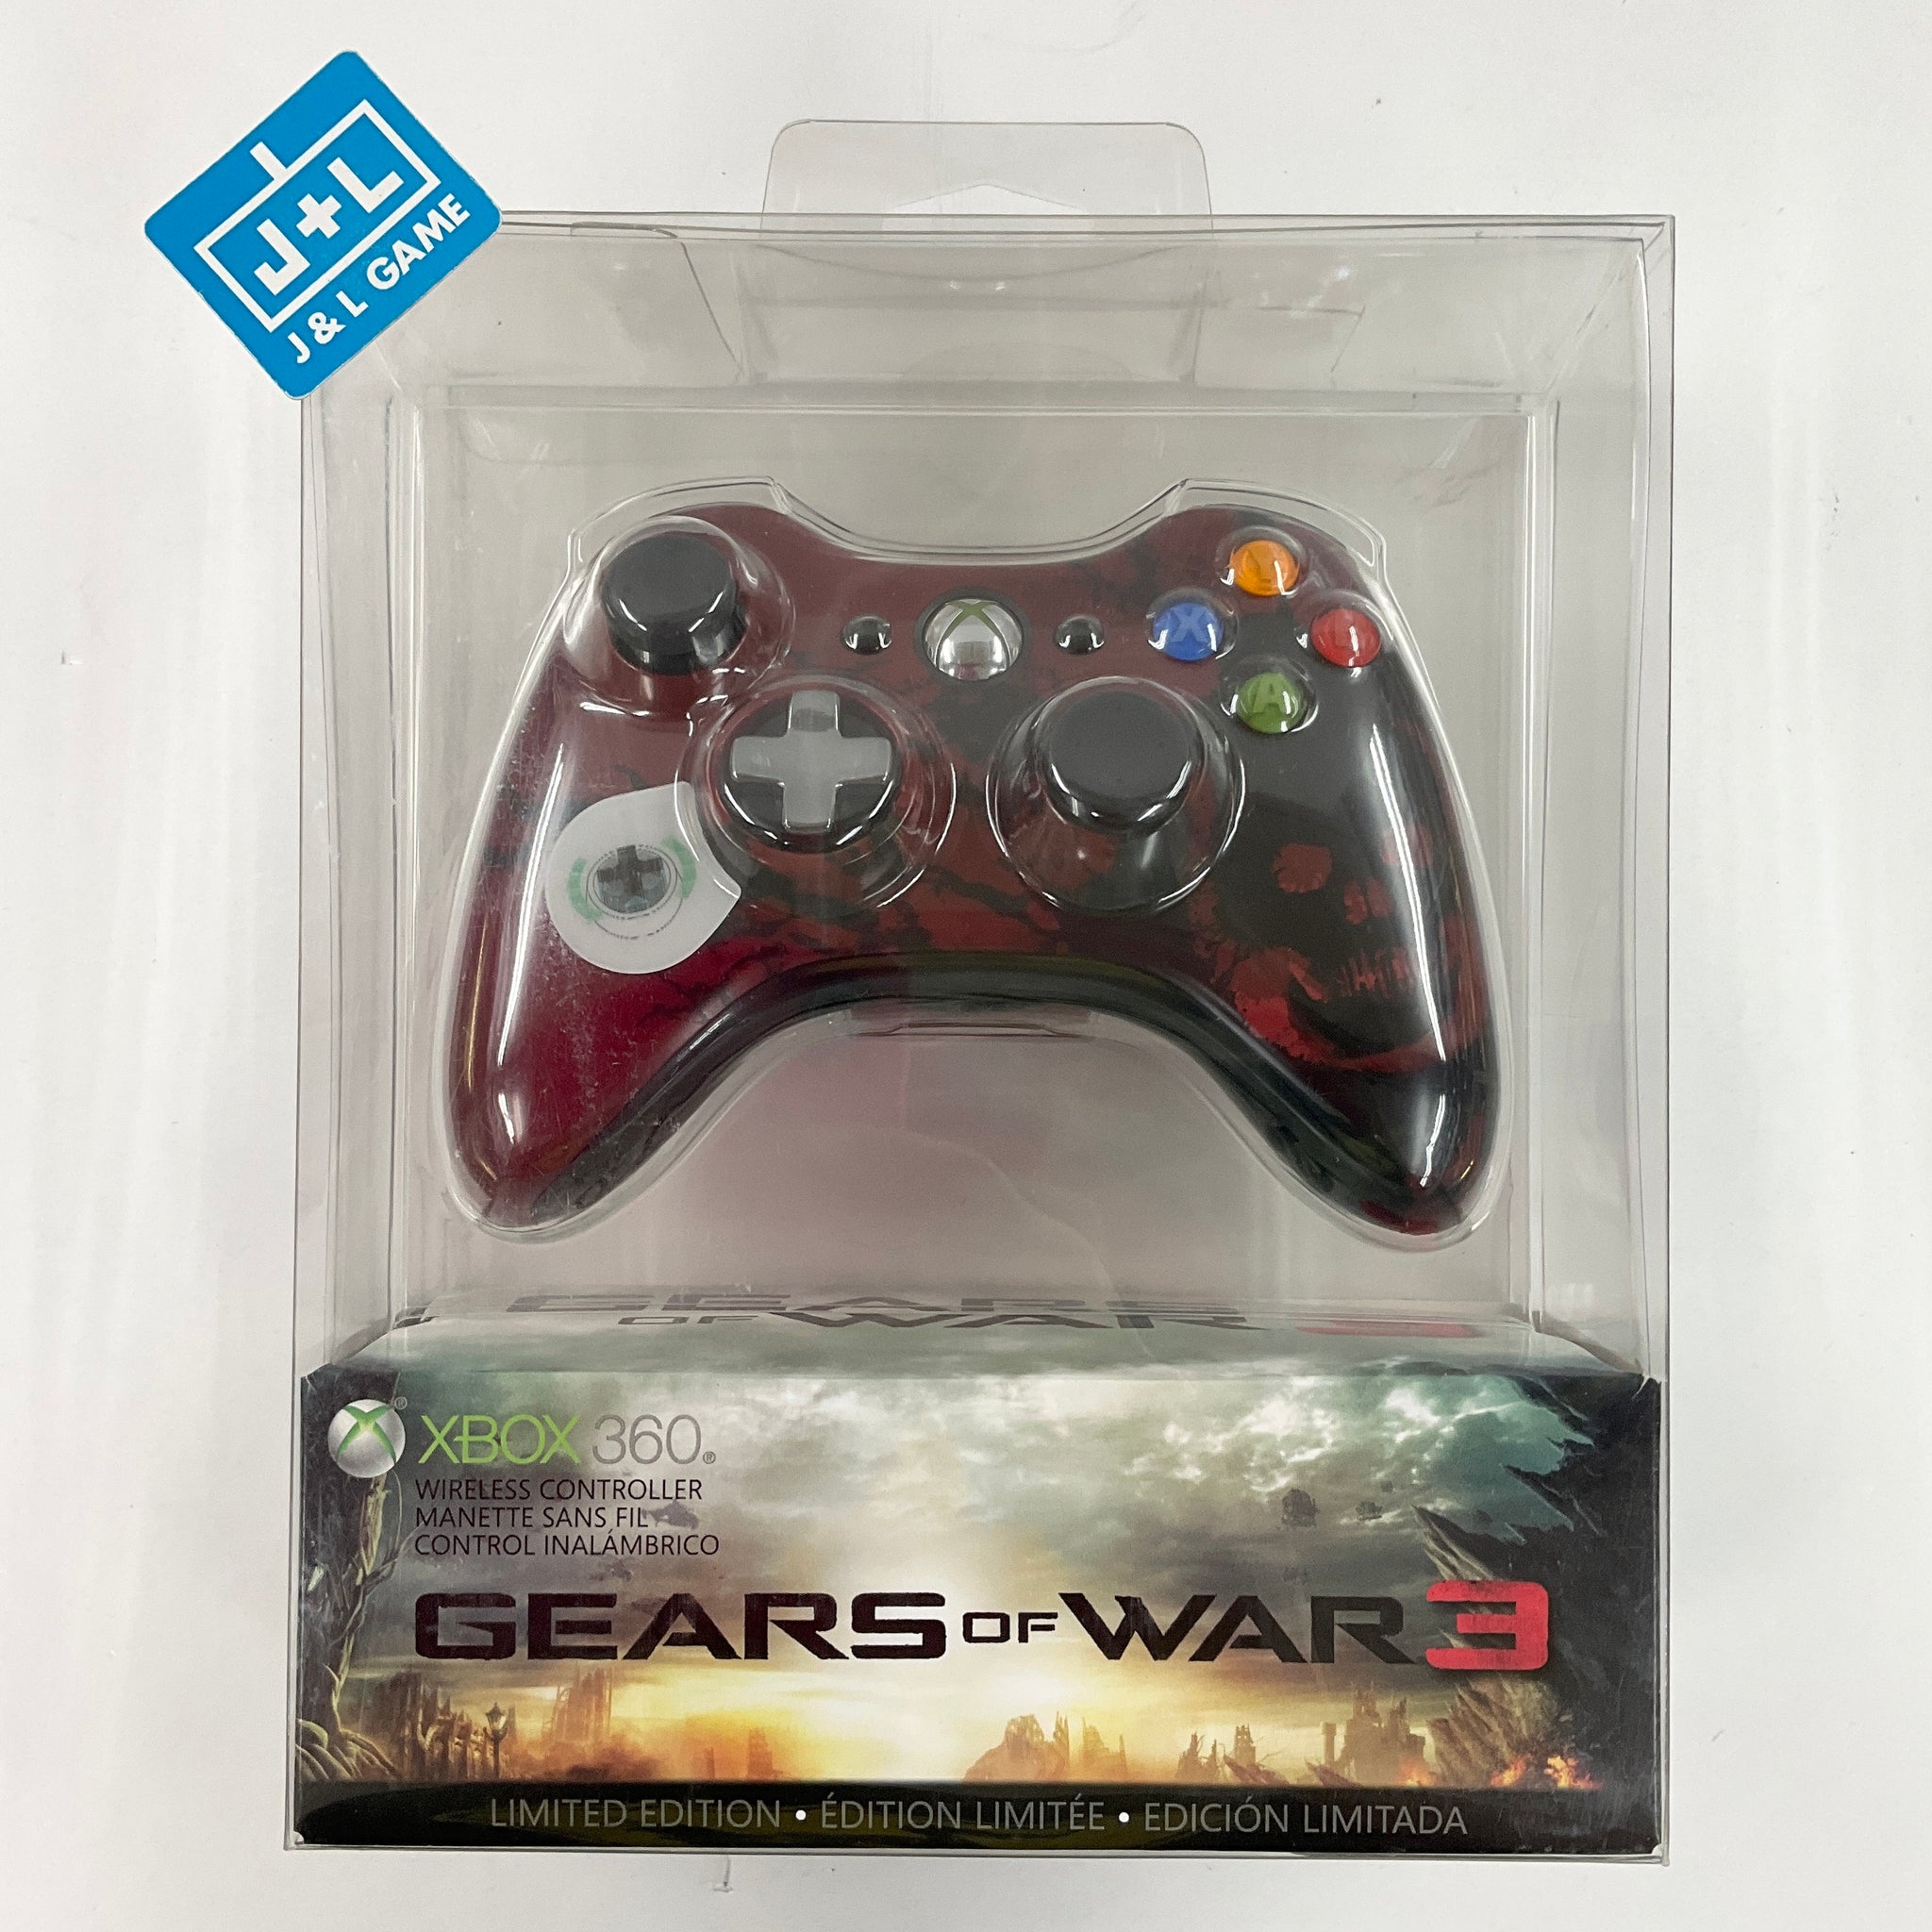 Xbox 360 Gears of War 3 Limited Edition Console Bundle - Xbox 360